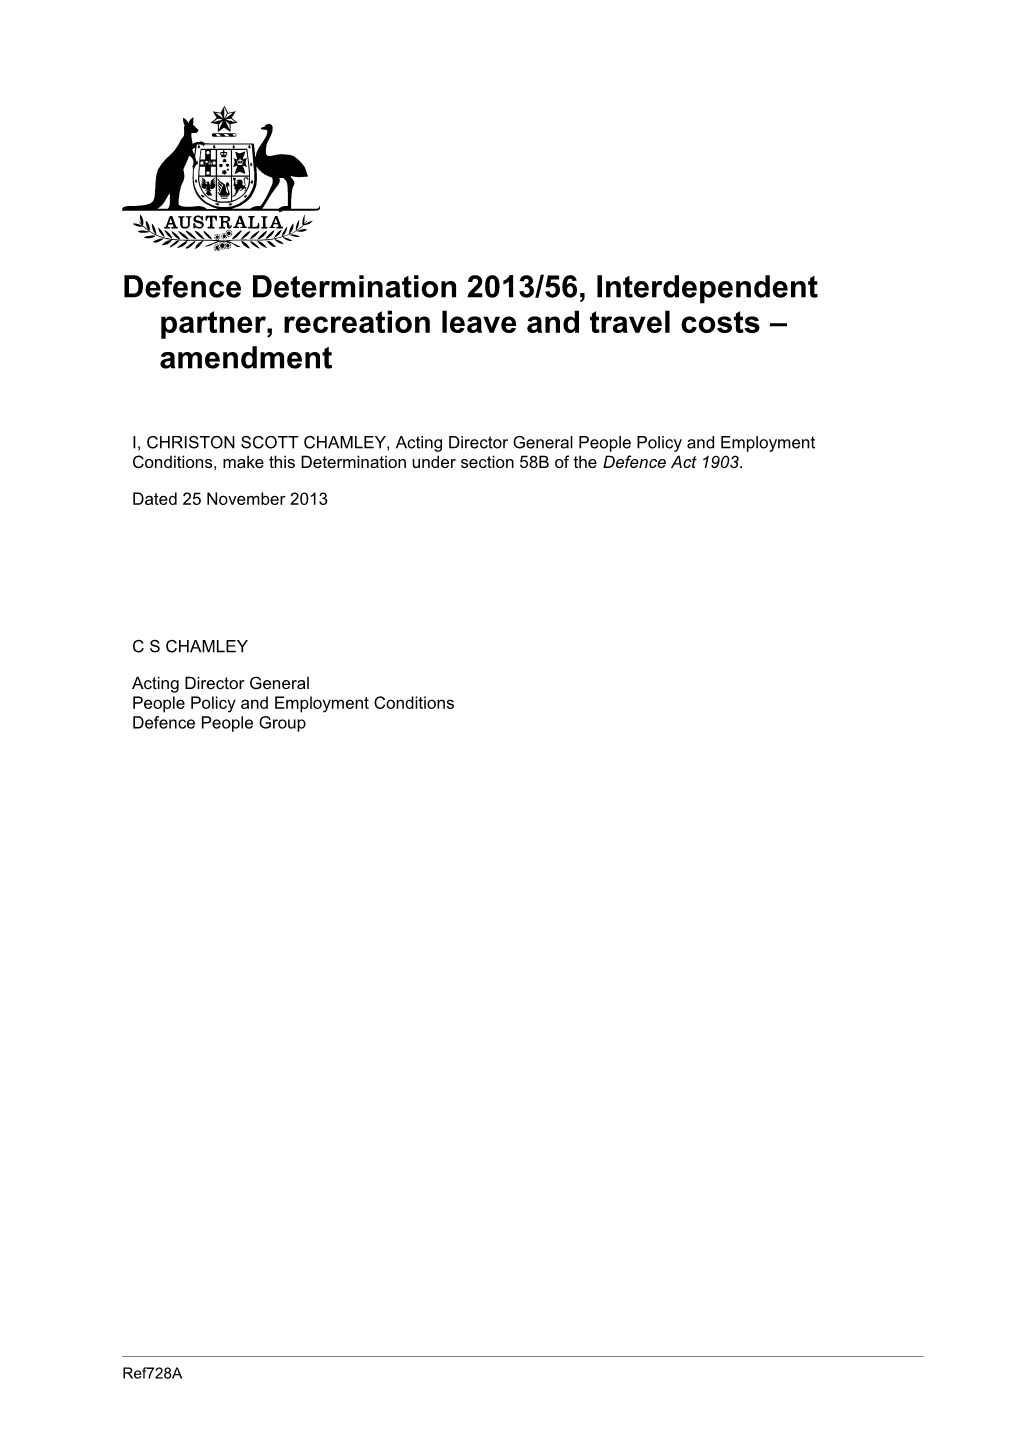 Defence Determination 2013/56, Interdependent Partner, Recreation Leave and Travel Costs